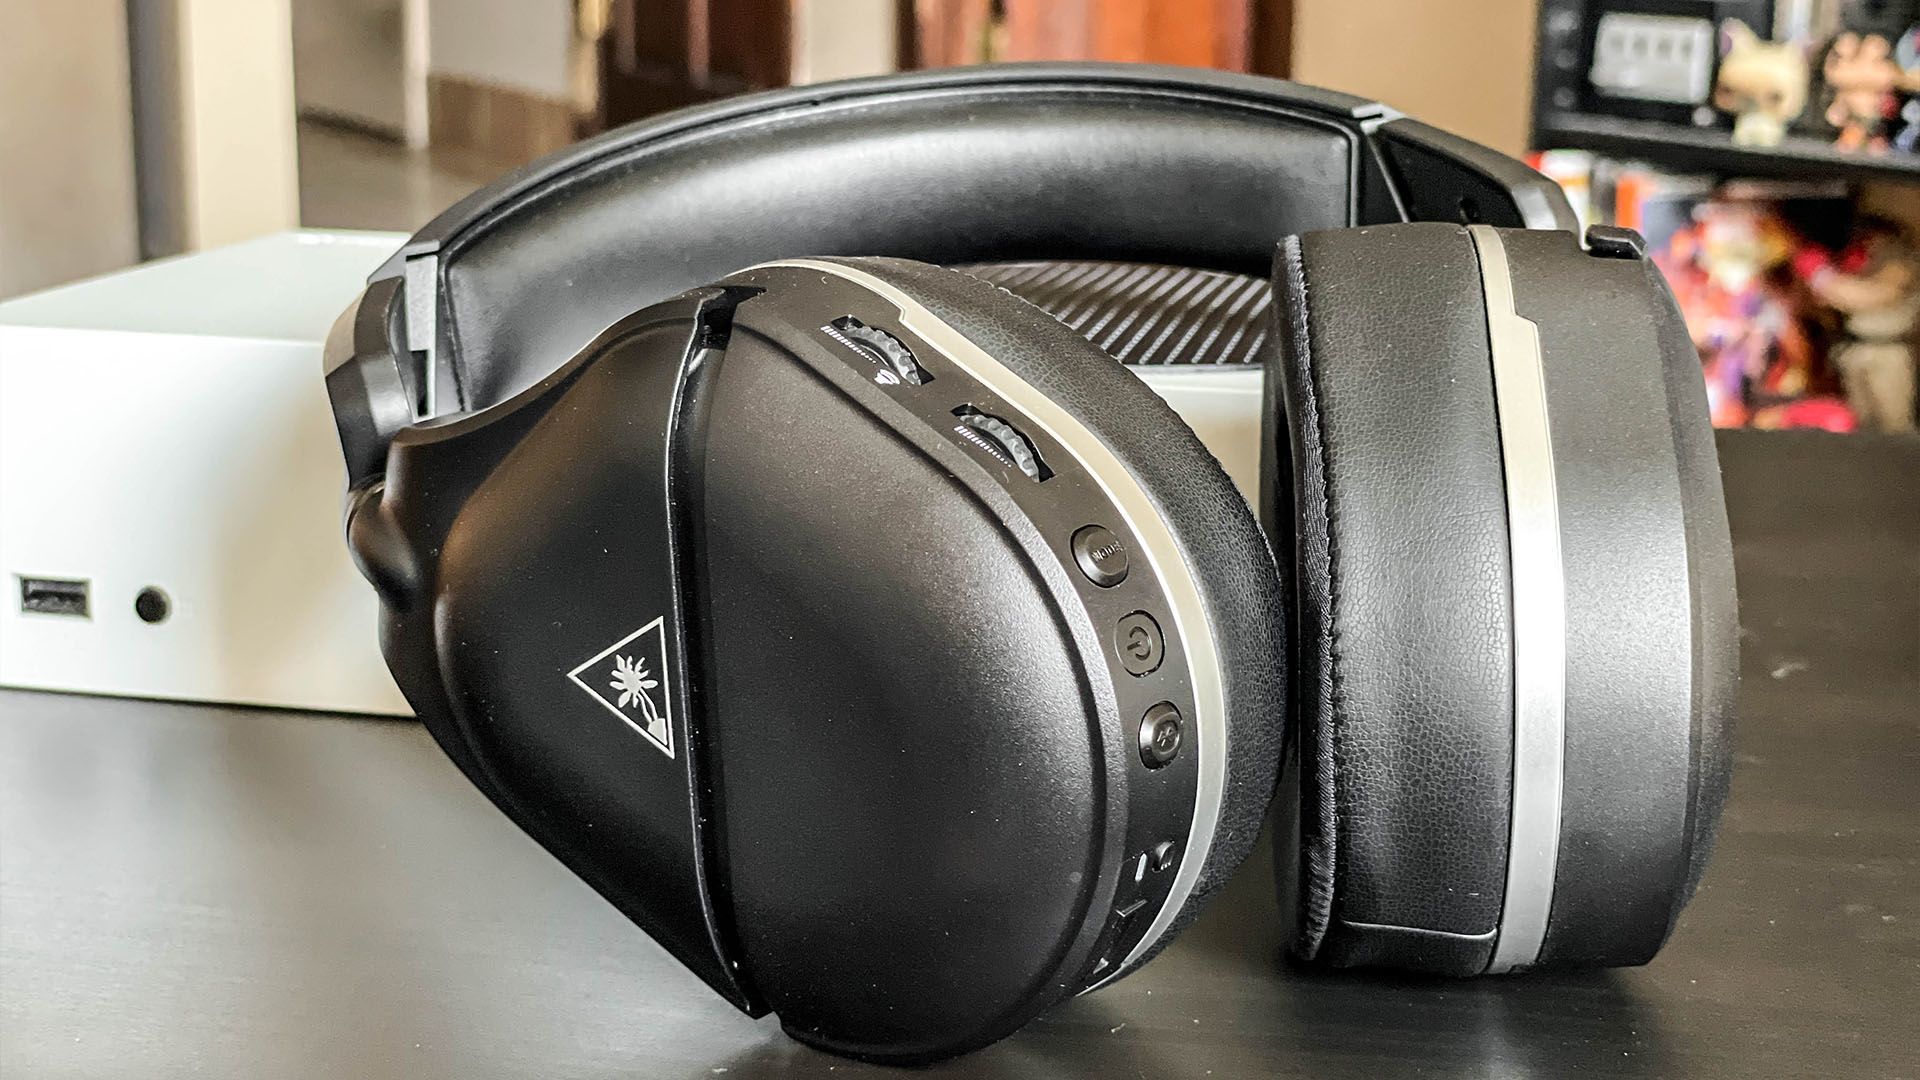 Best Gaming Headsets of 2021